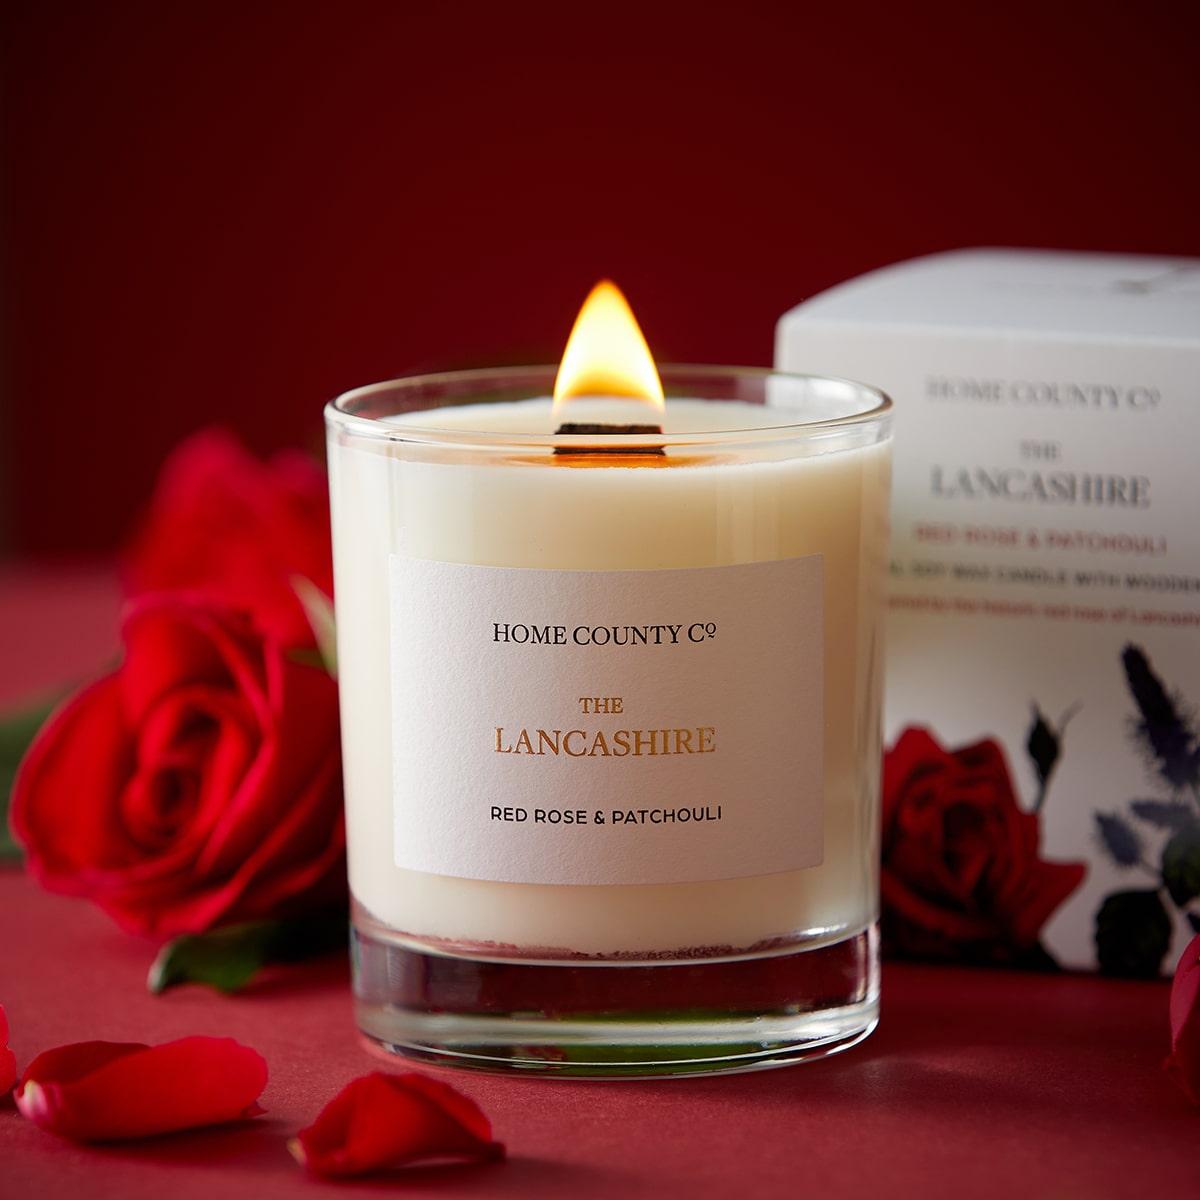 A red rose scented candle from the Home County Co is shown alight next to a red rose and its illustrated candle packaging